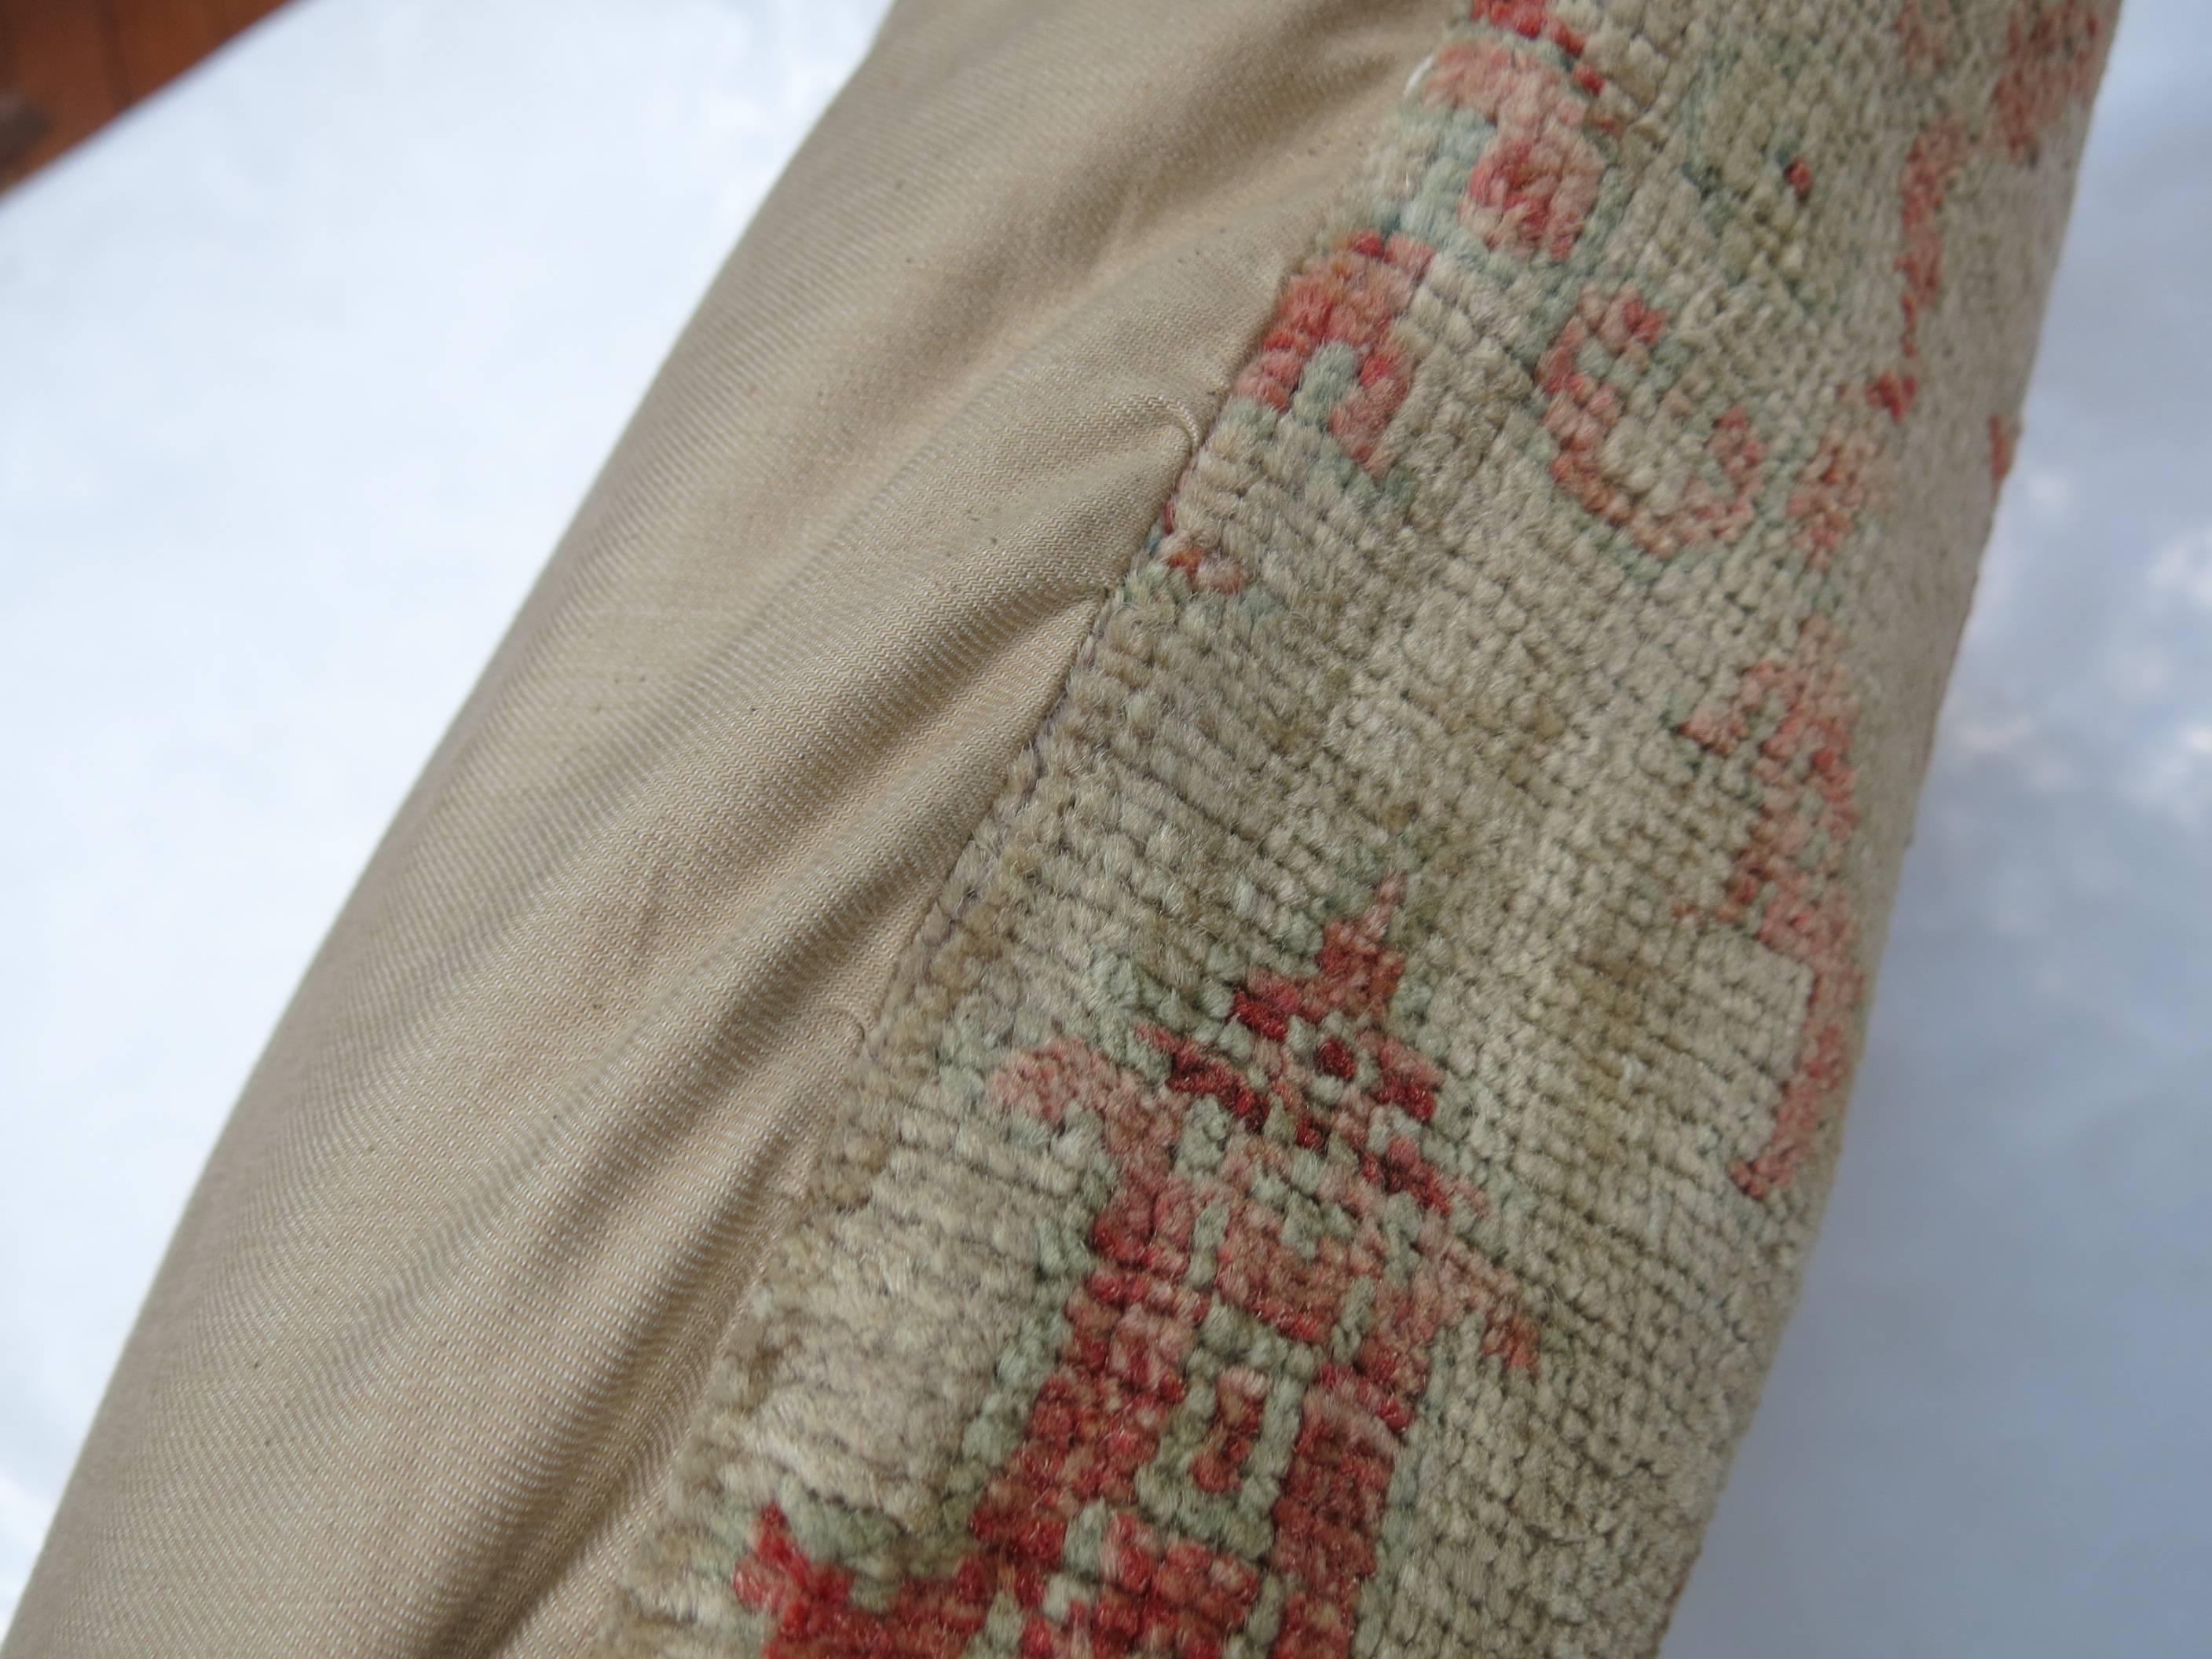 Pillow made from a Vintage Turkish rug in camel and soft red.

19'' x 19''